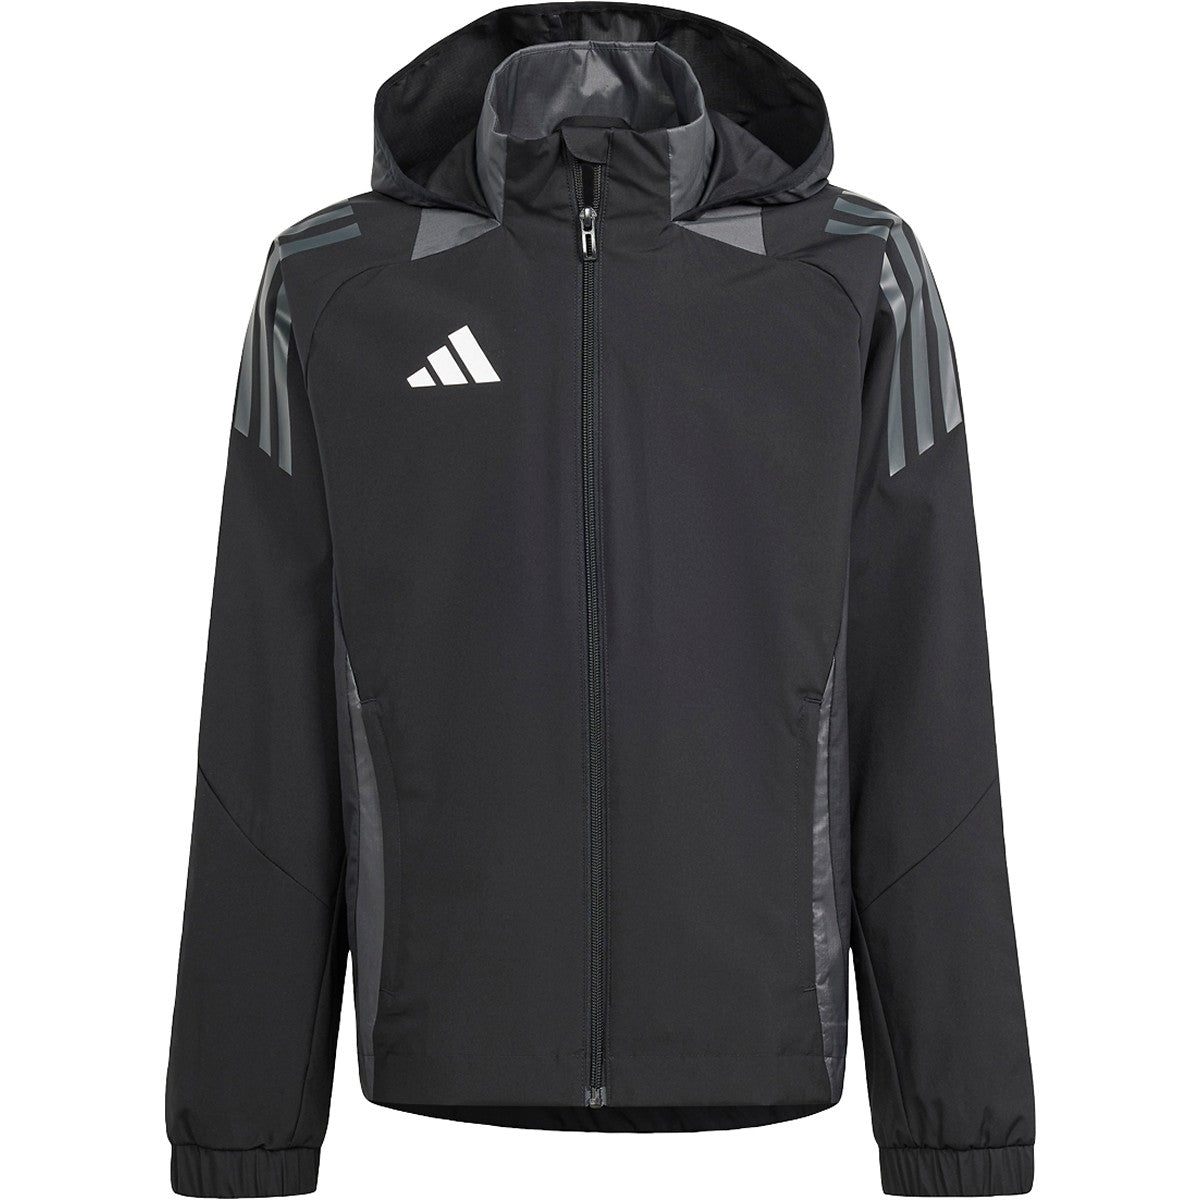 adidas TIRO 24 COMPETITION YOUTH ALL WEATHER JACKET